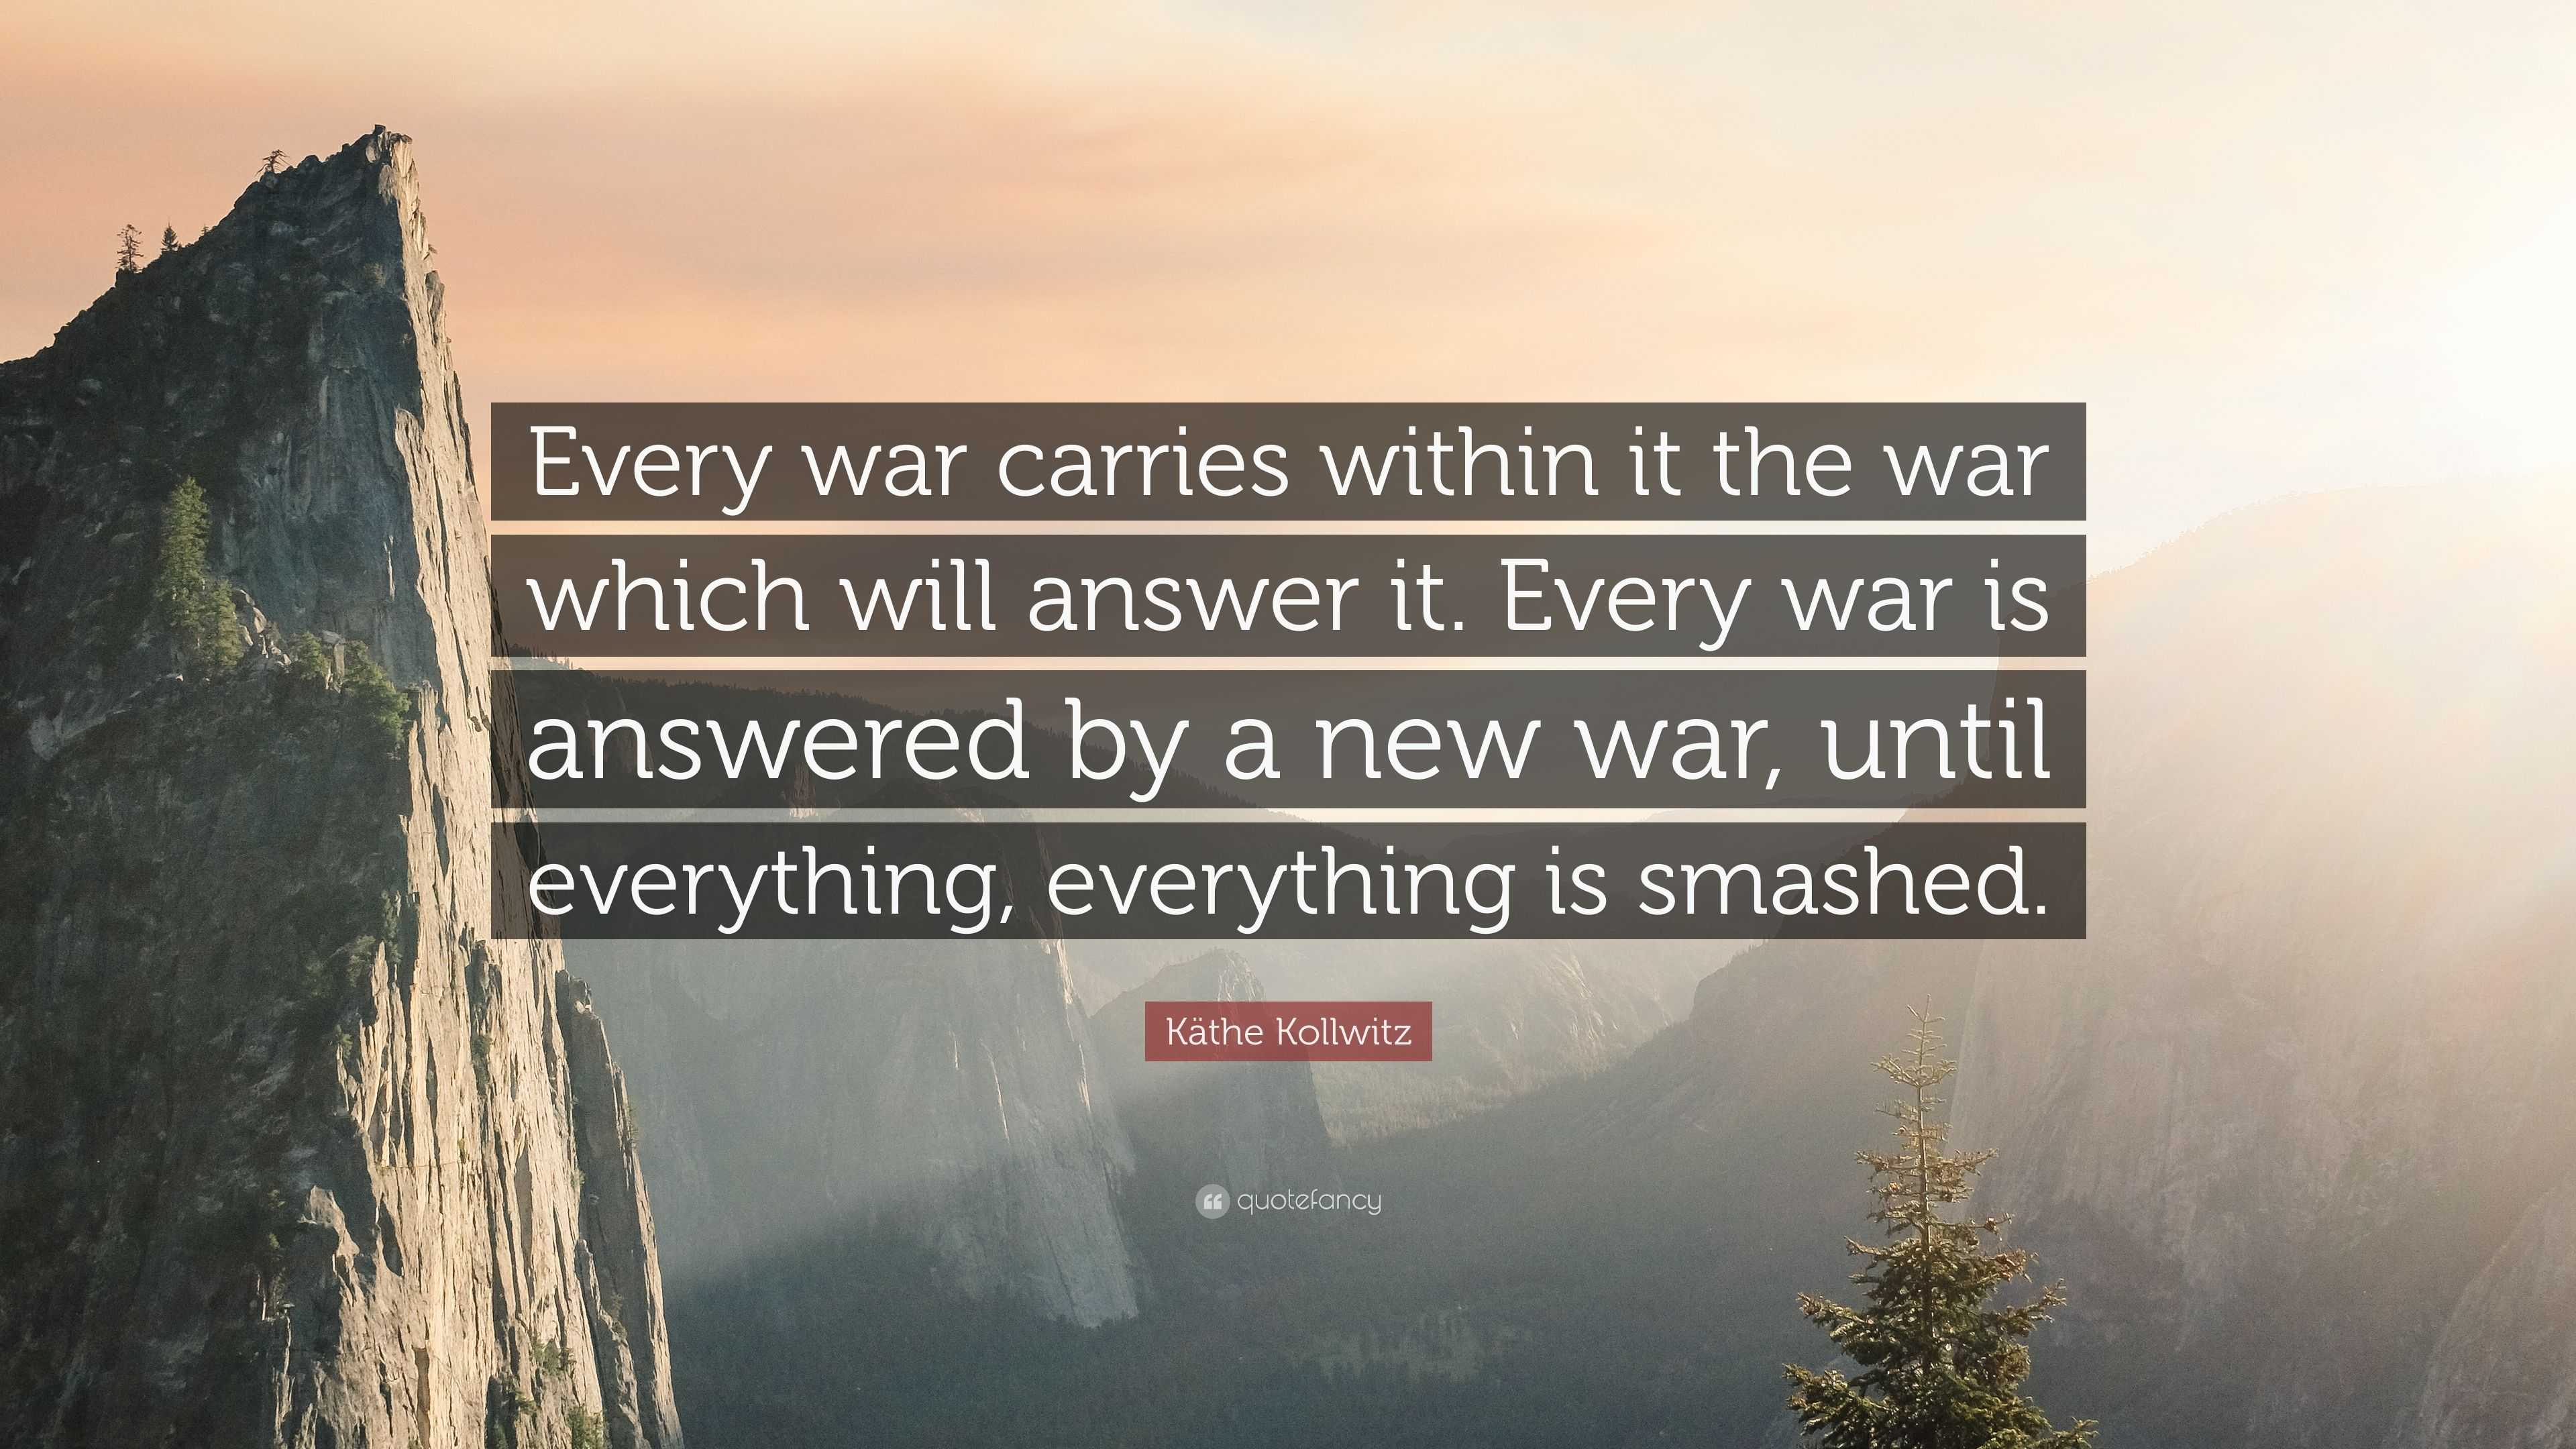 War Is the Answer